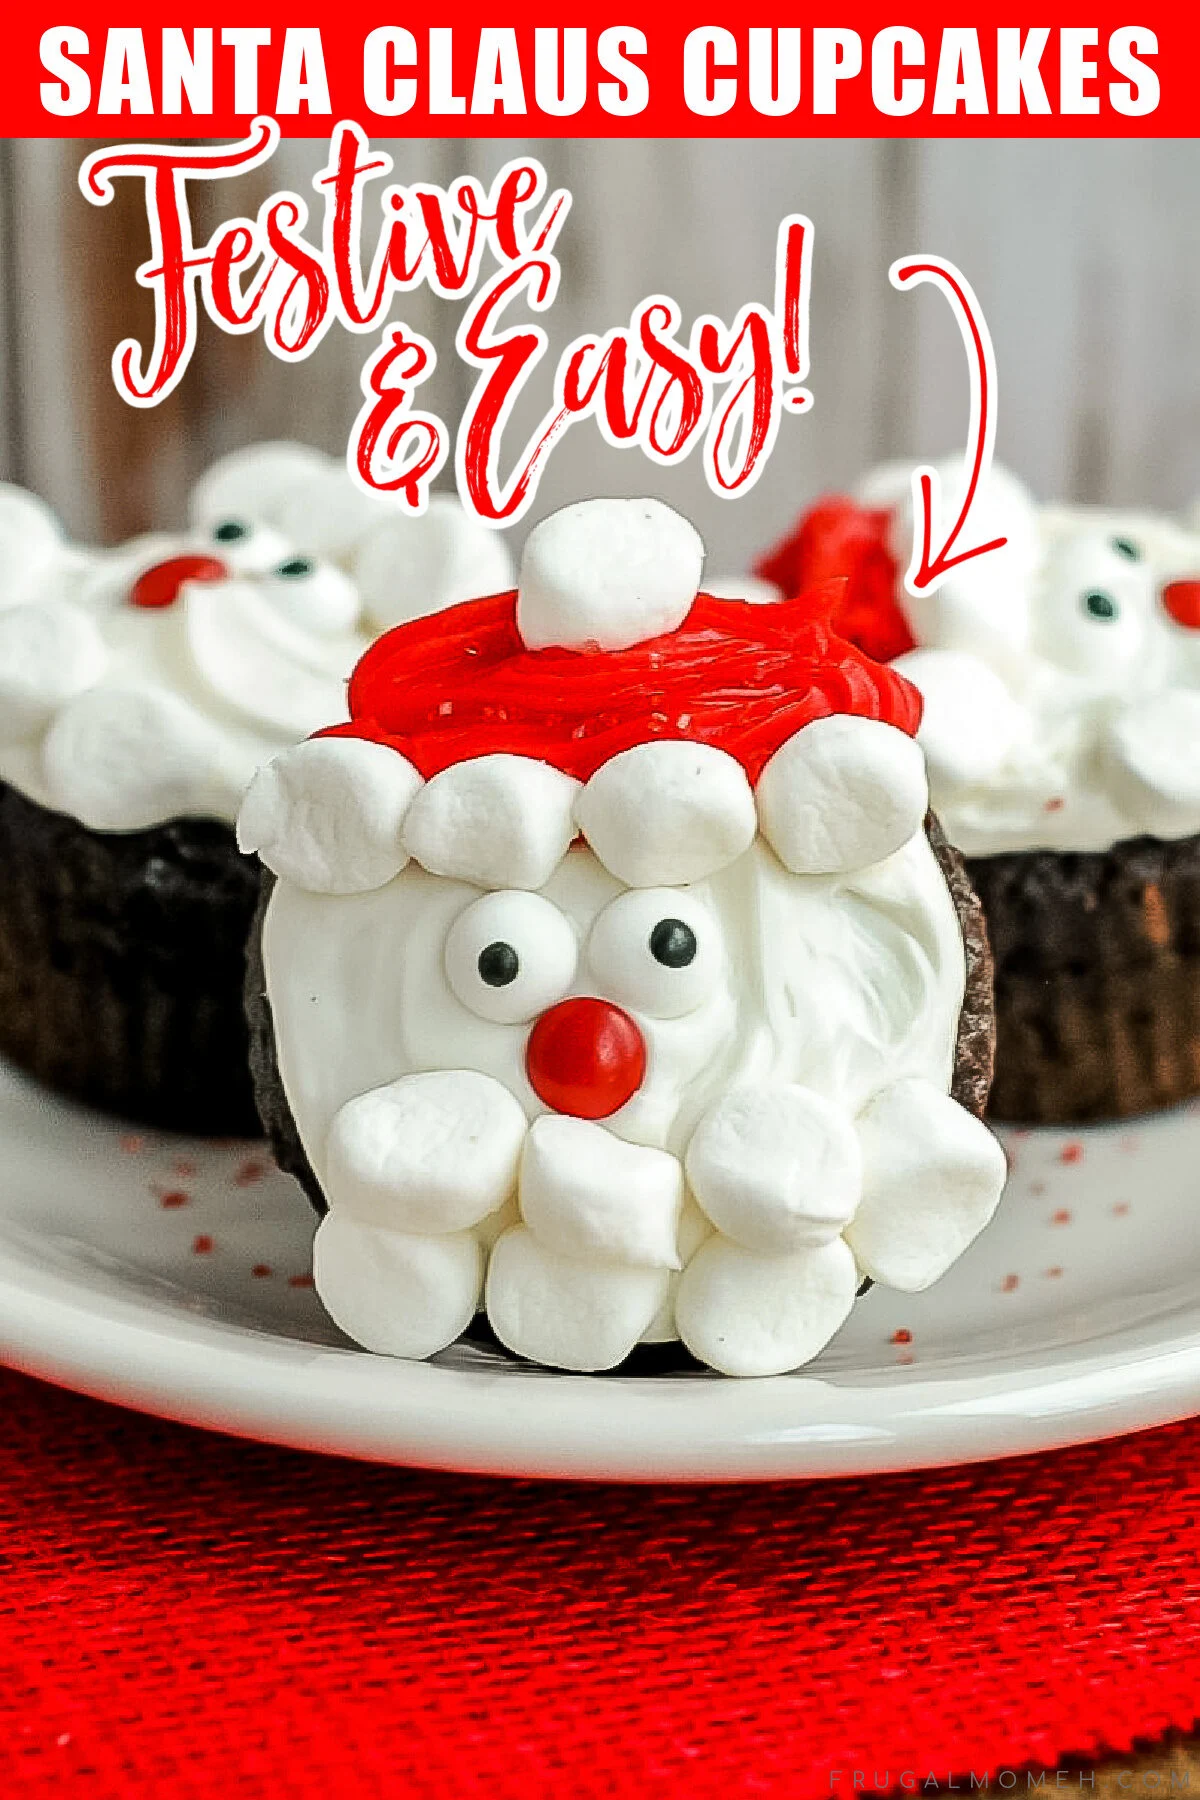 These Santa Claus Cupcakes are great for bringing to a Christmas party - such a fun idea to celebrate this winter holiday! 